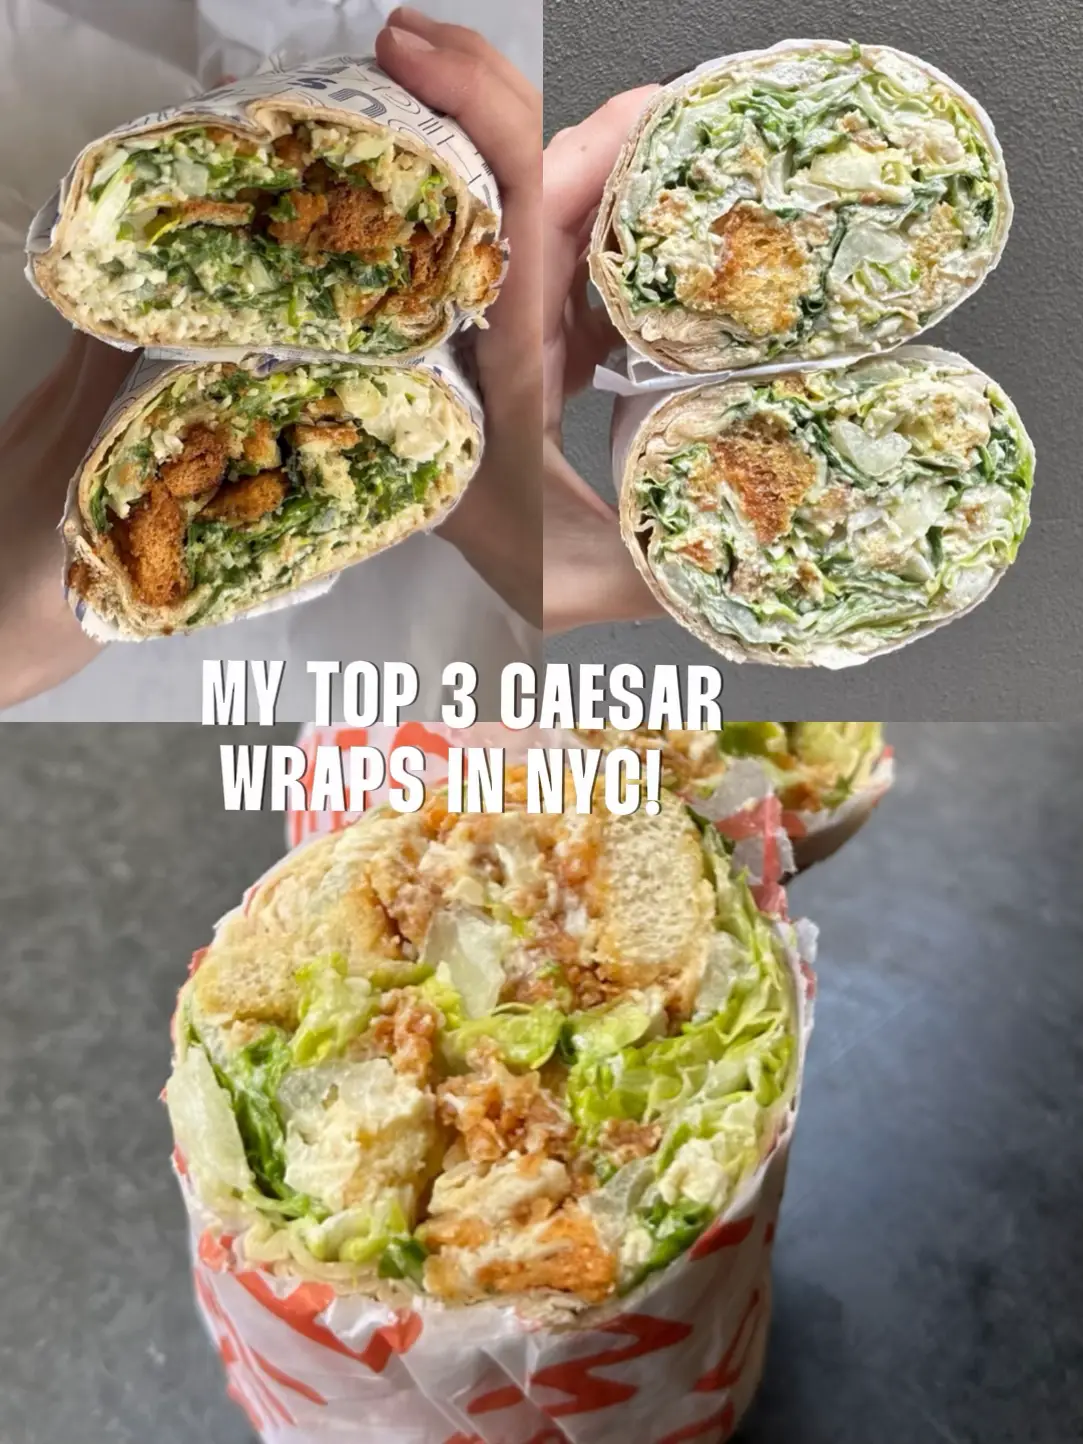 My Top 3 Caesar Wraps in NYC's images